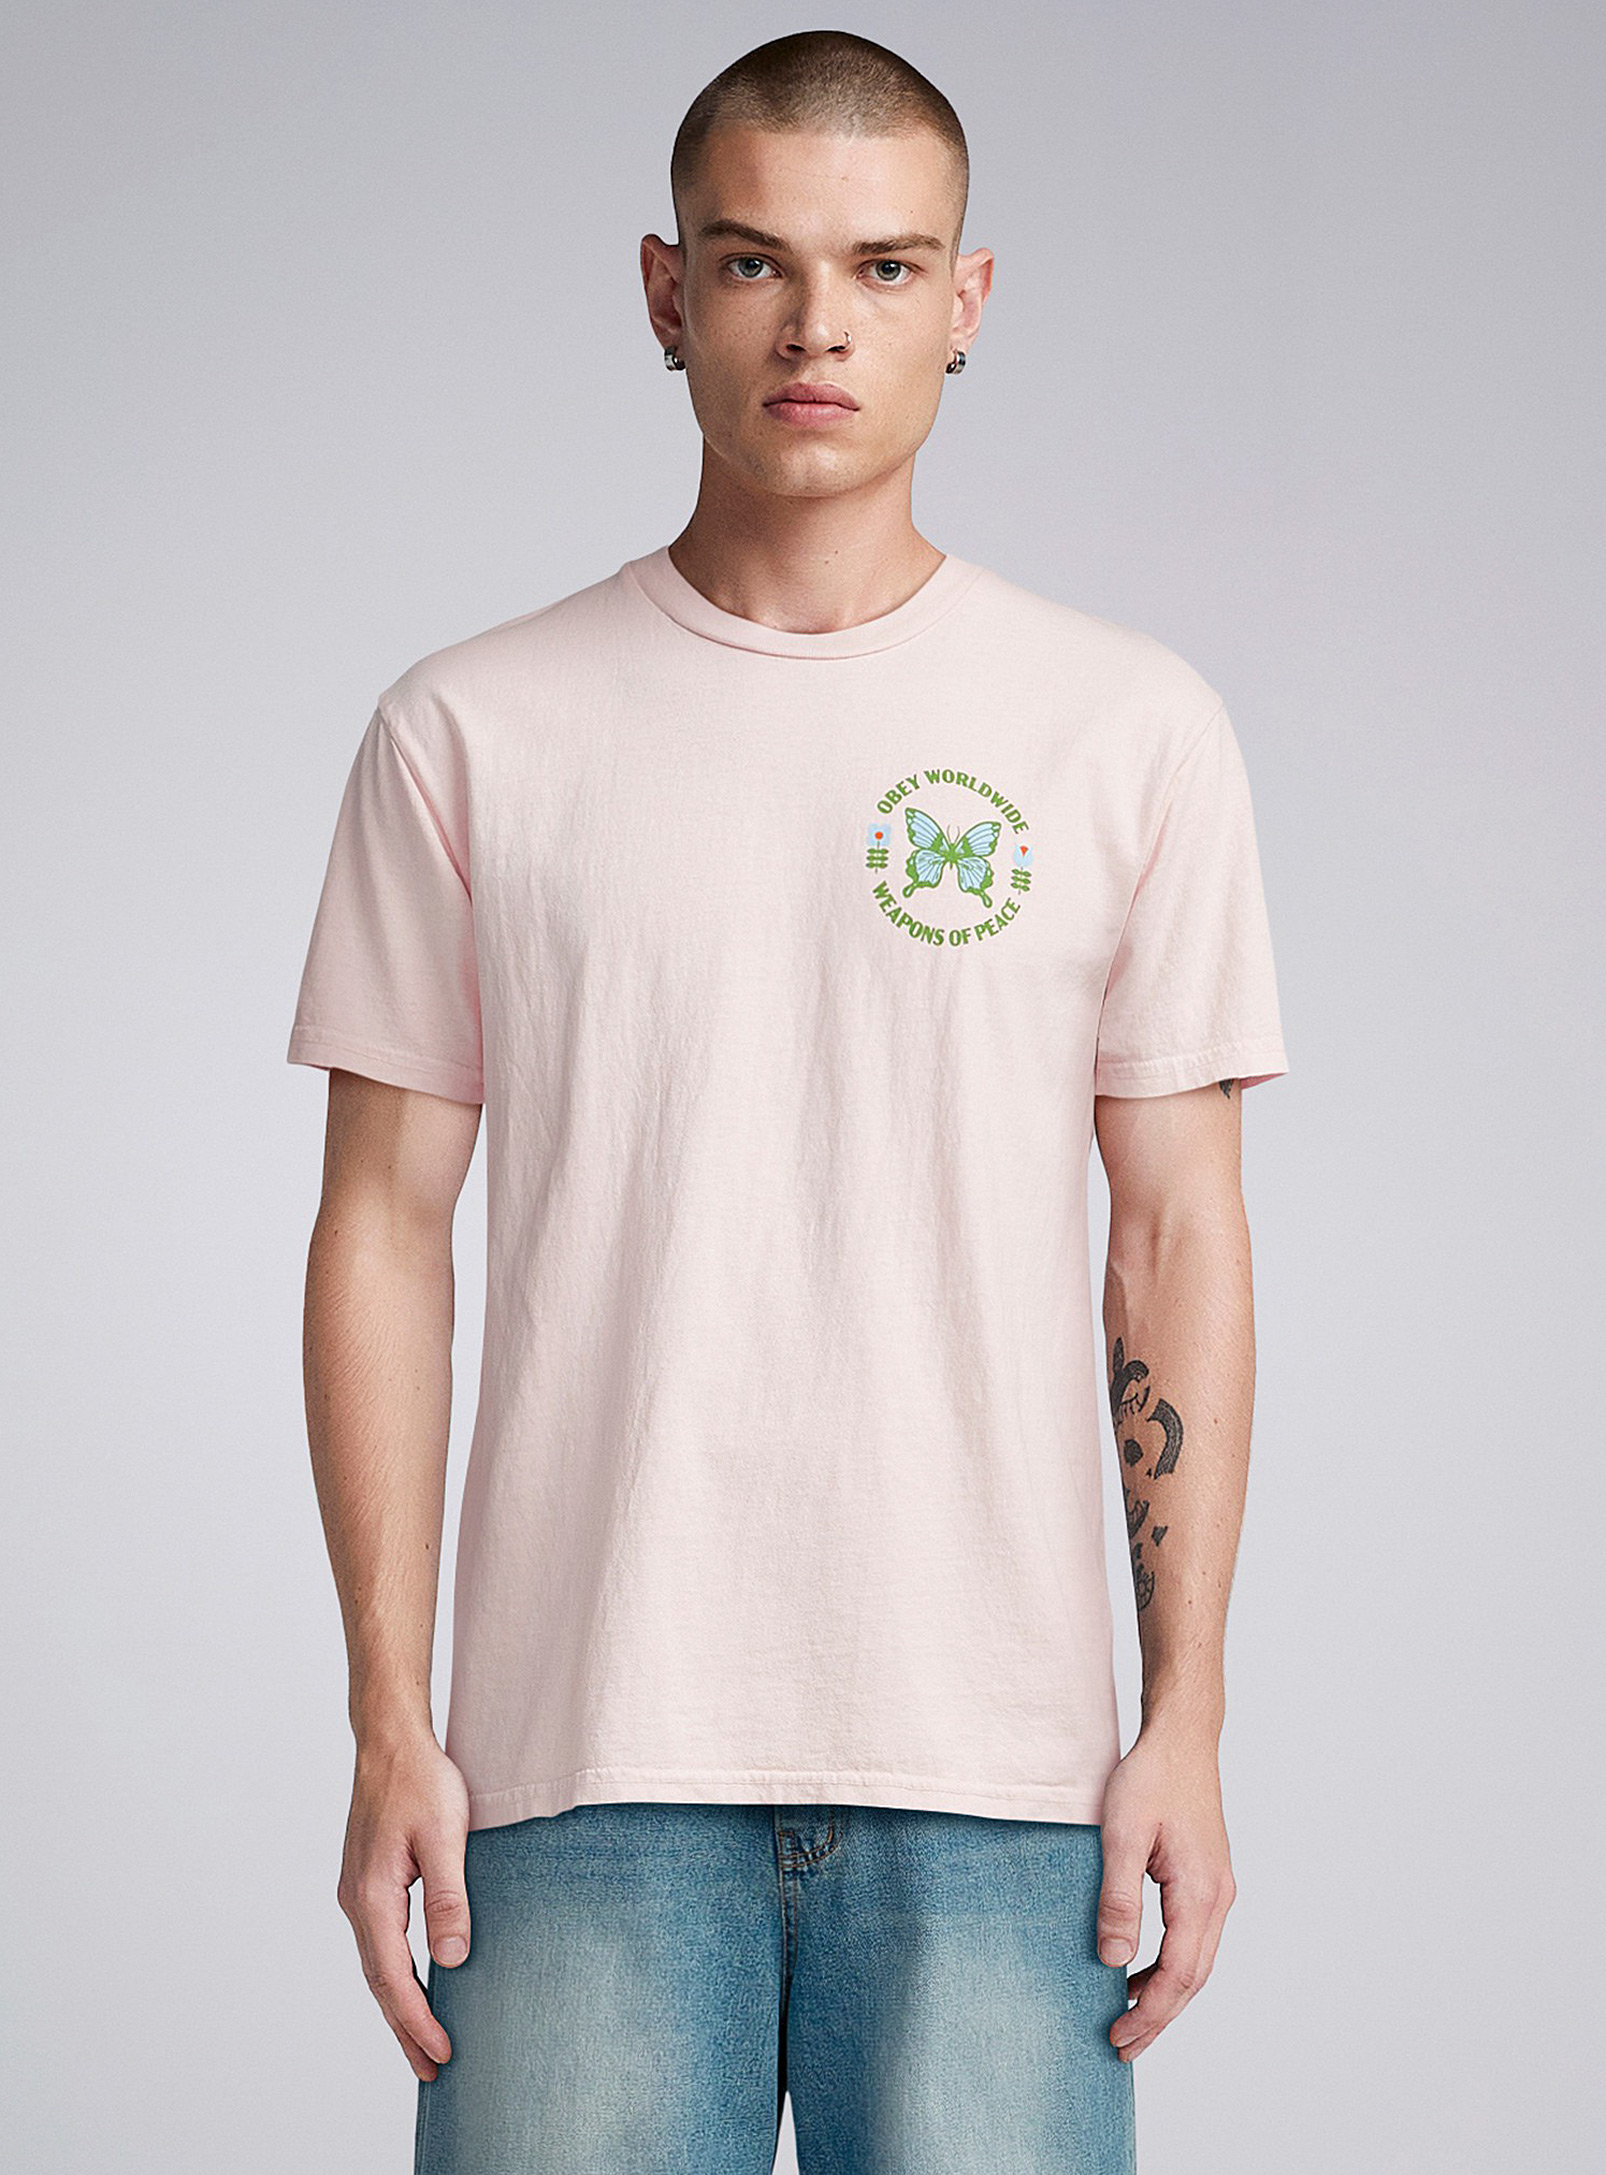 Obey - Men's Weapons of Peace T-shirt